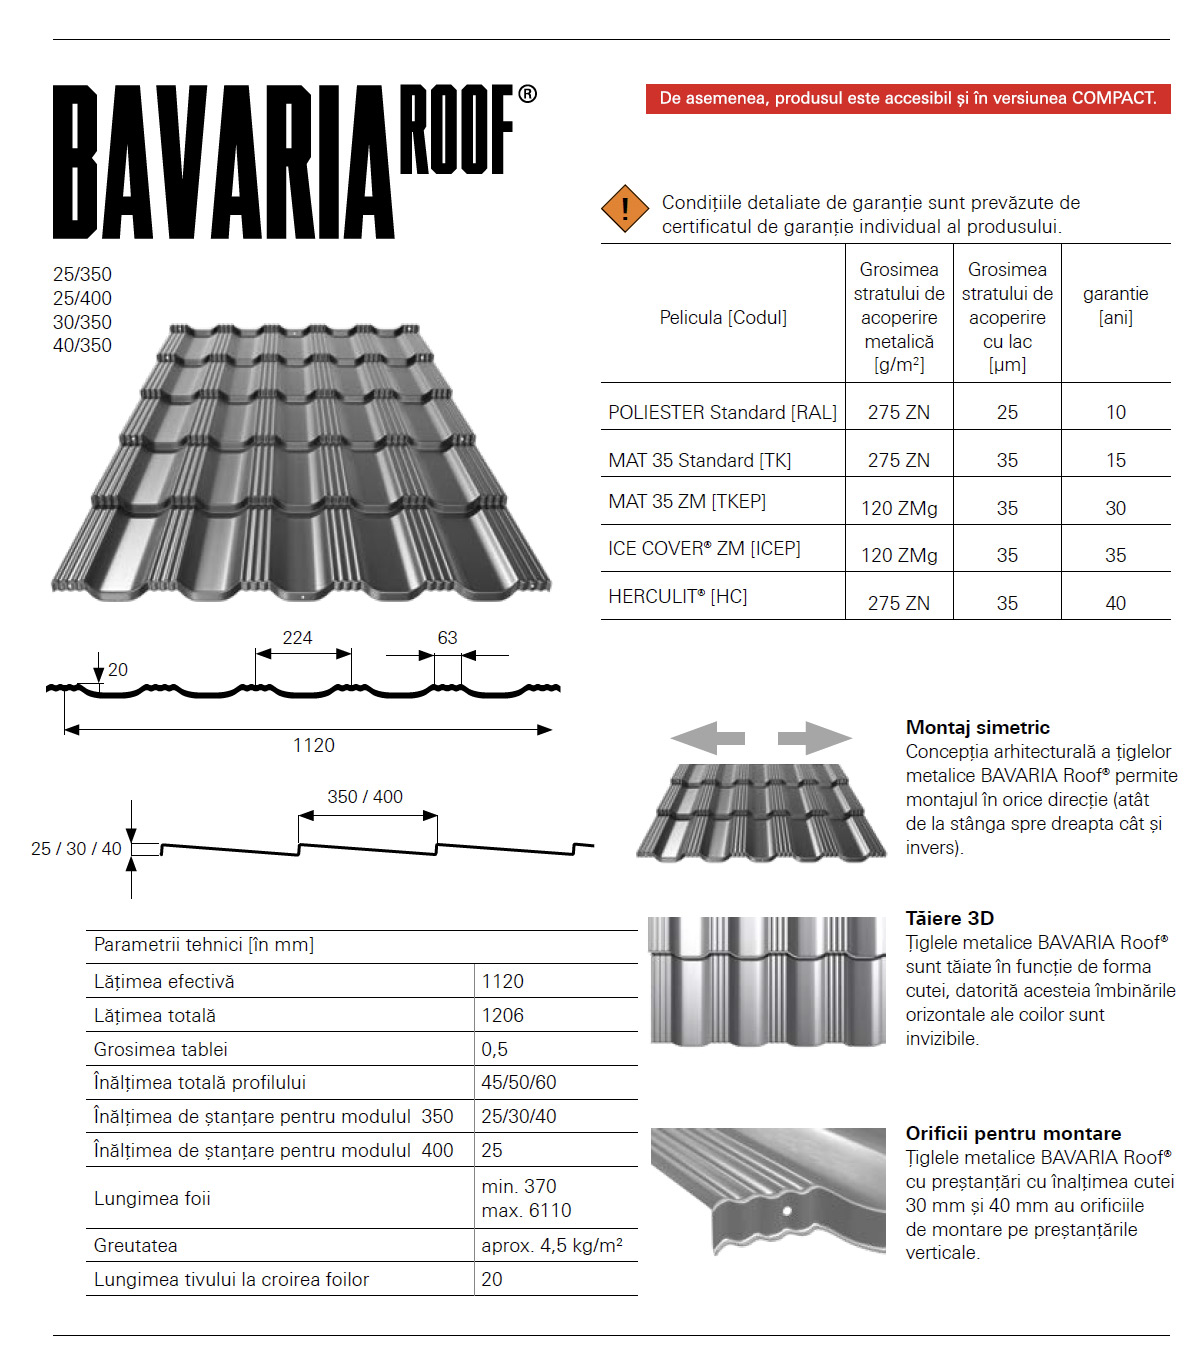 BAVARIA ROOF 40 Ice Cover